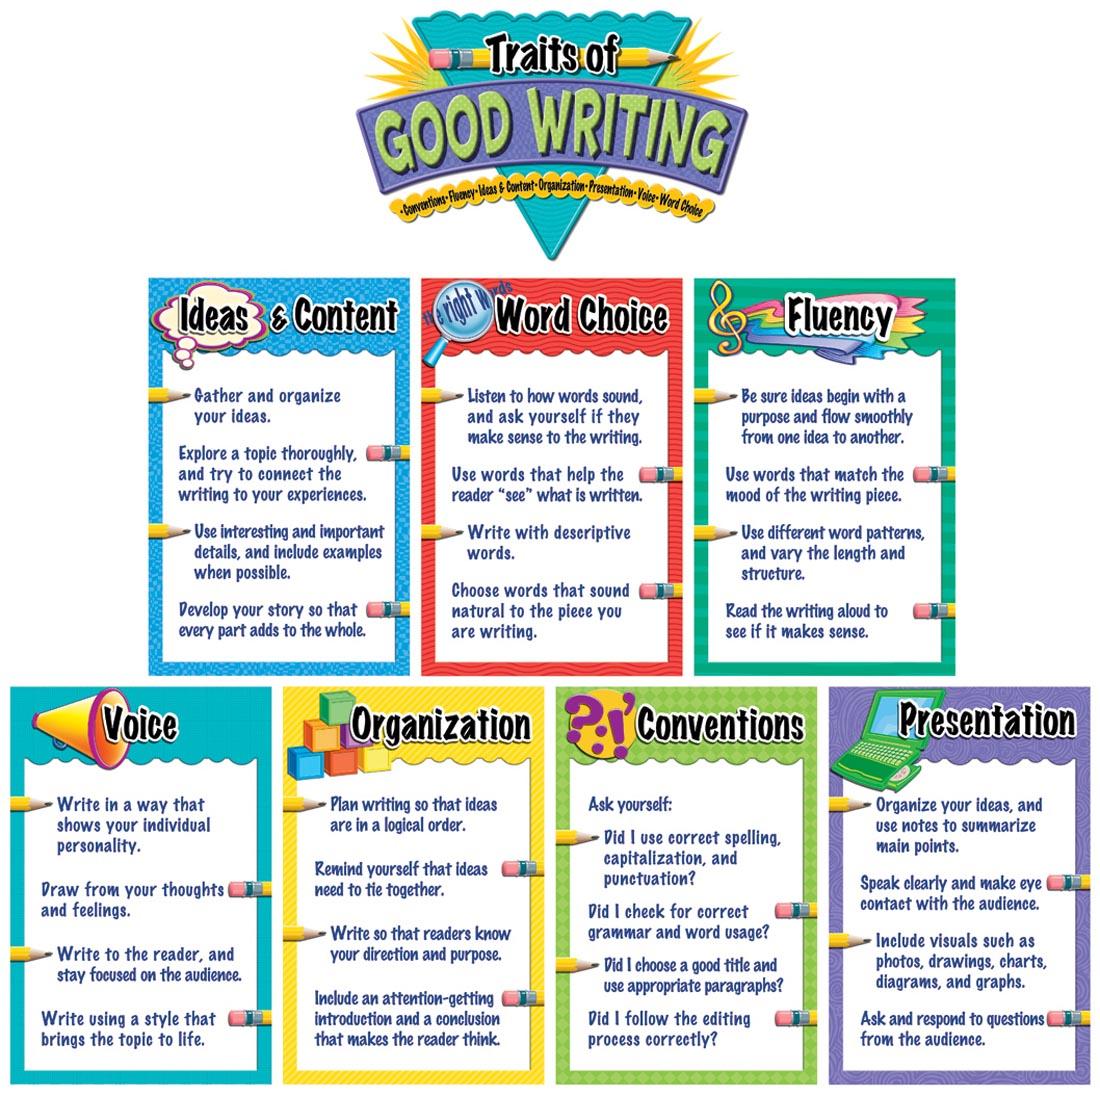 Traits of Good Writing Bulletin Board Set includes posters about ideas & content, word choice, fluency, voice, organization, conventions and presentation